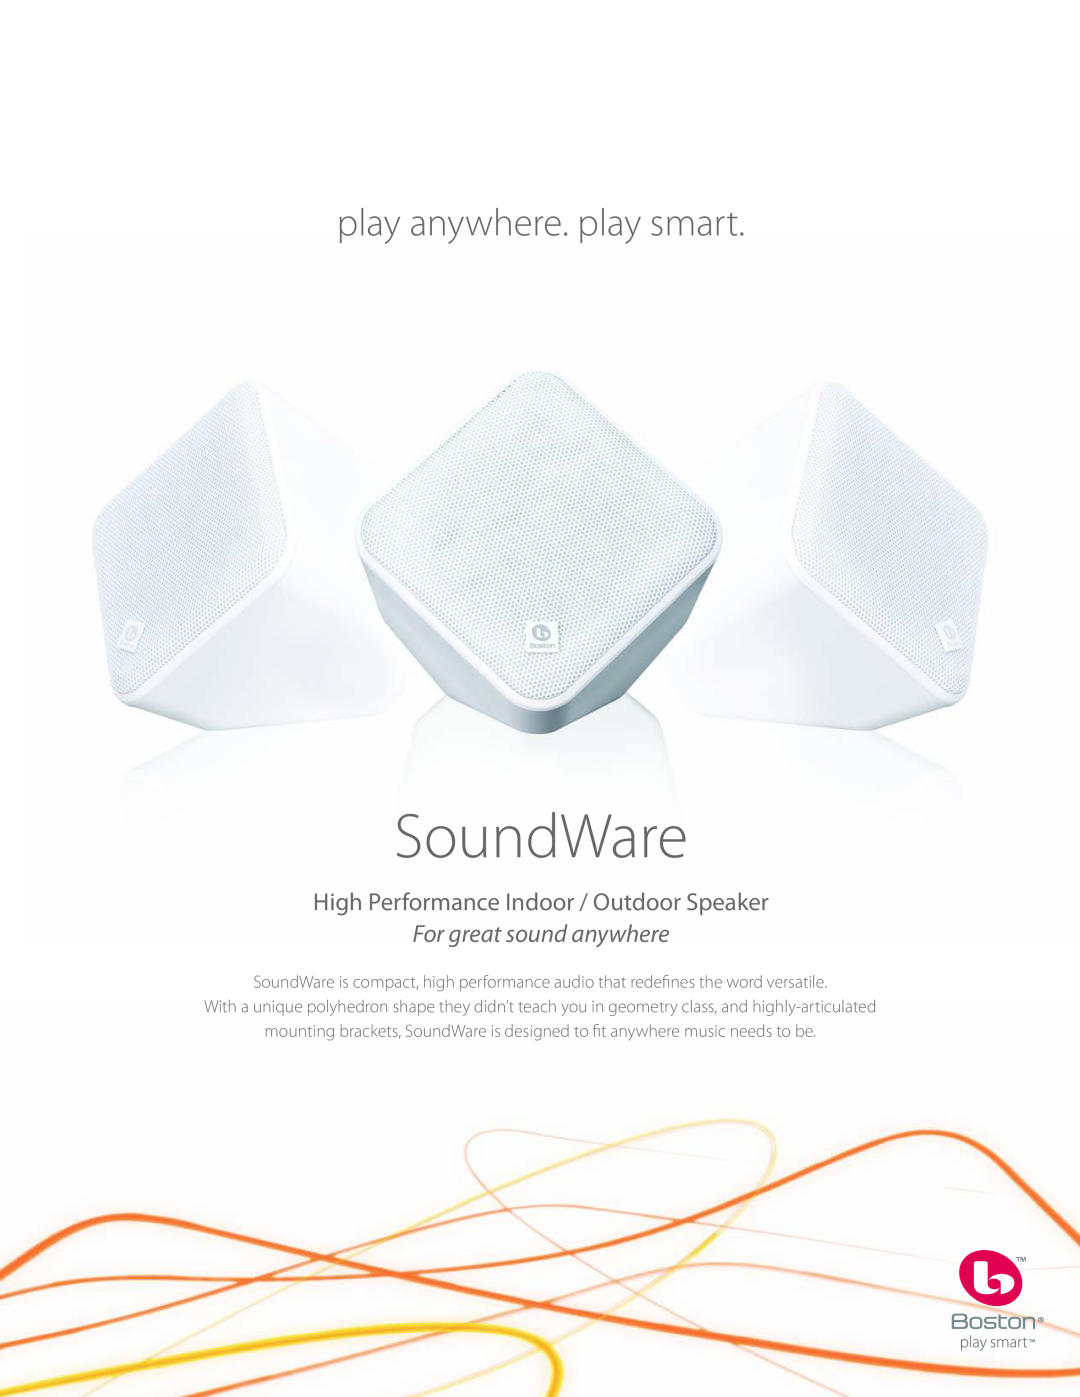 Boston Acoustics SoundWare manual play anywhere. play smart, High Performance Indoor / Outdoor Speaker 